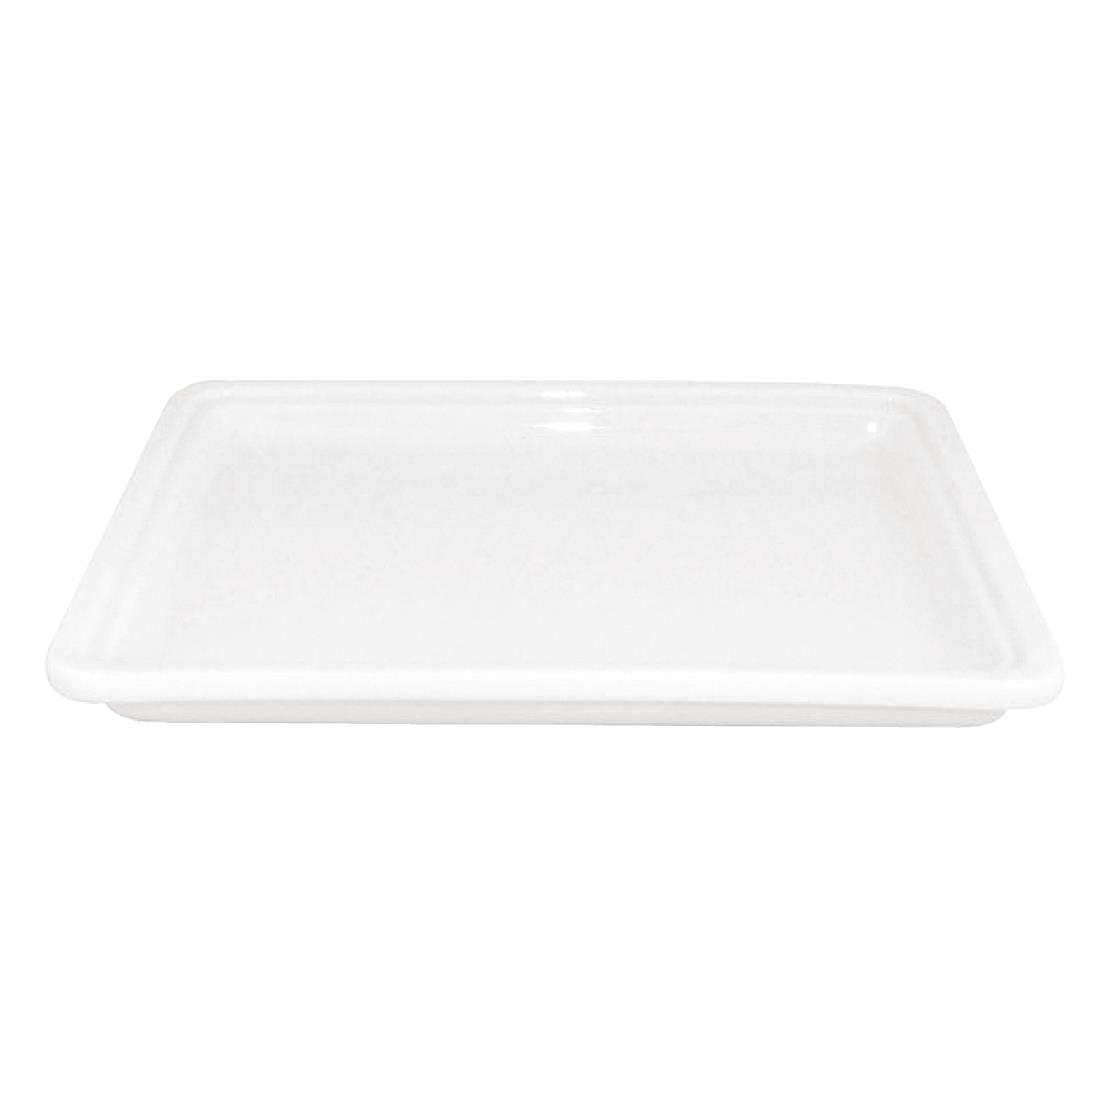 Olympia Whiteware 1/2 Half Size Gastronorm 30mm - CD716  - 3